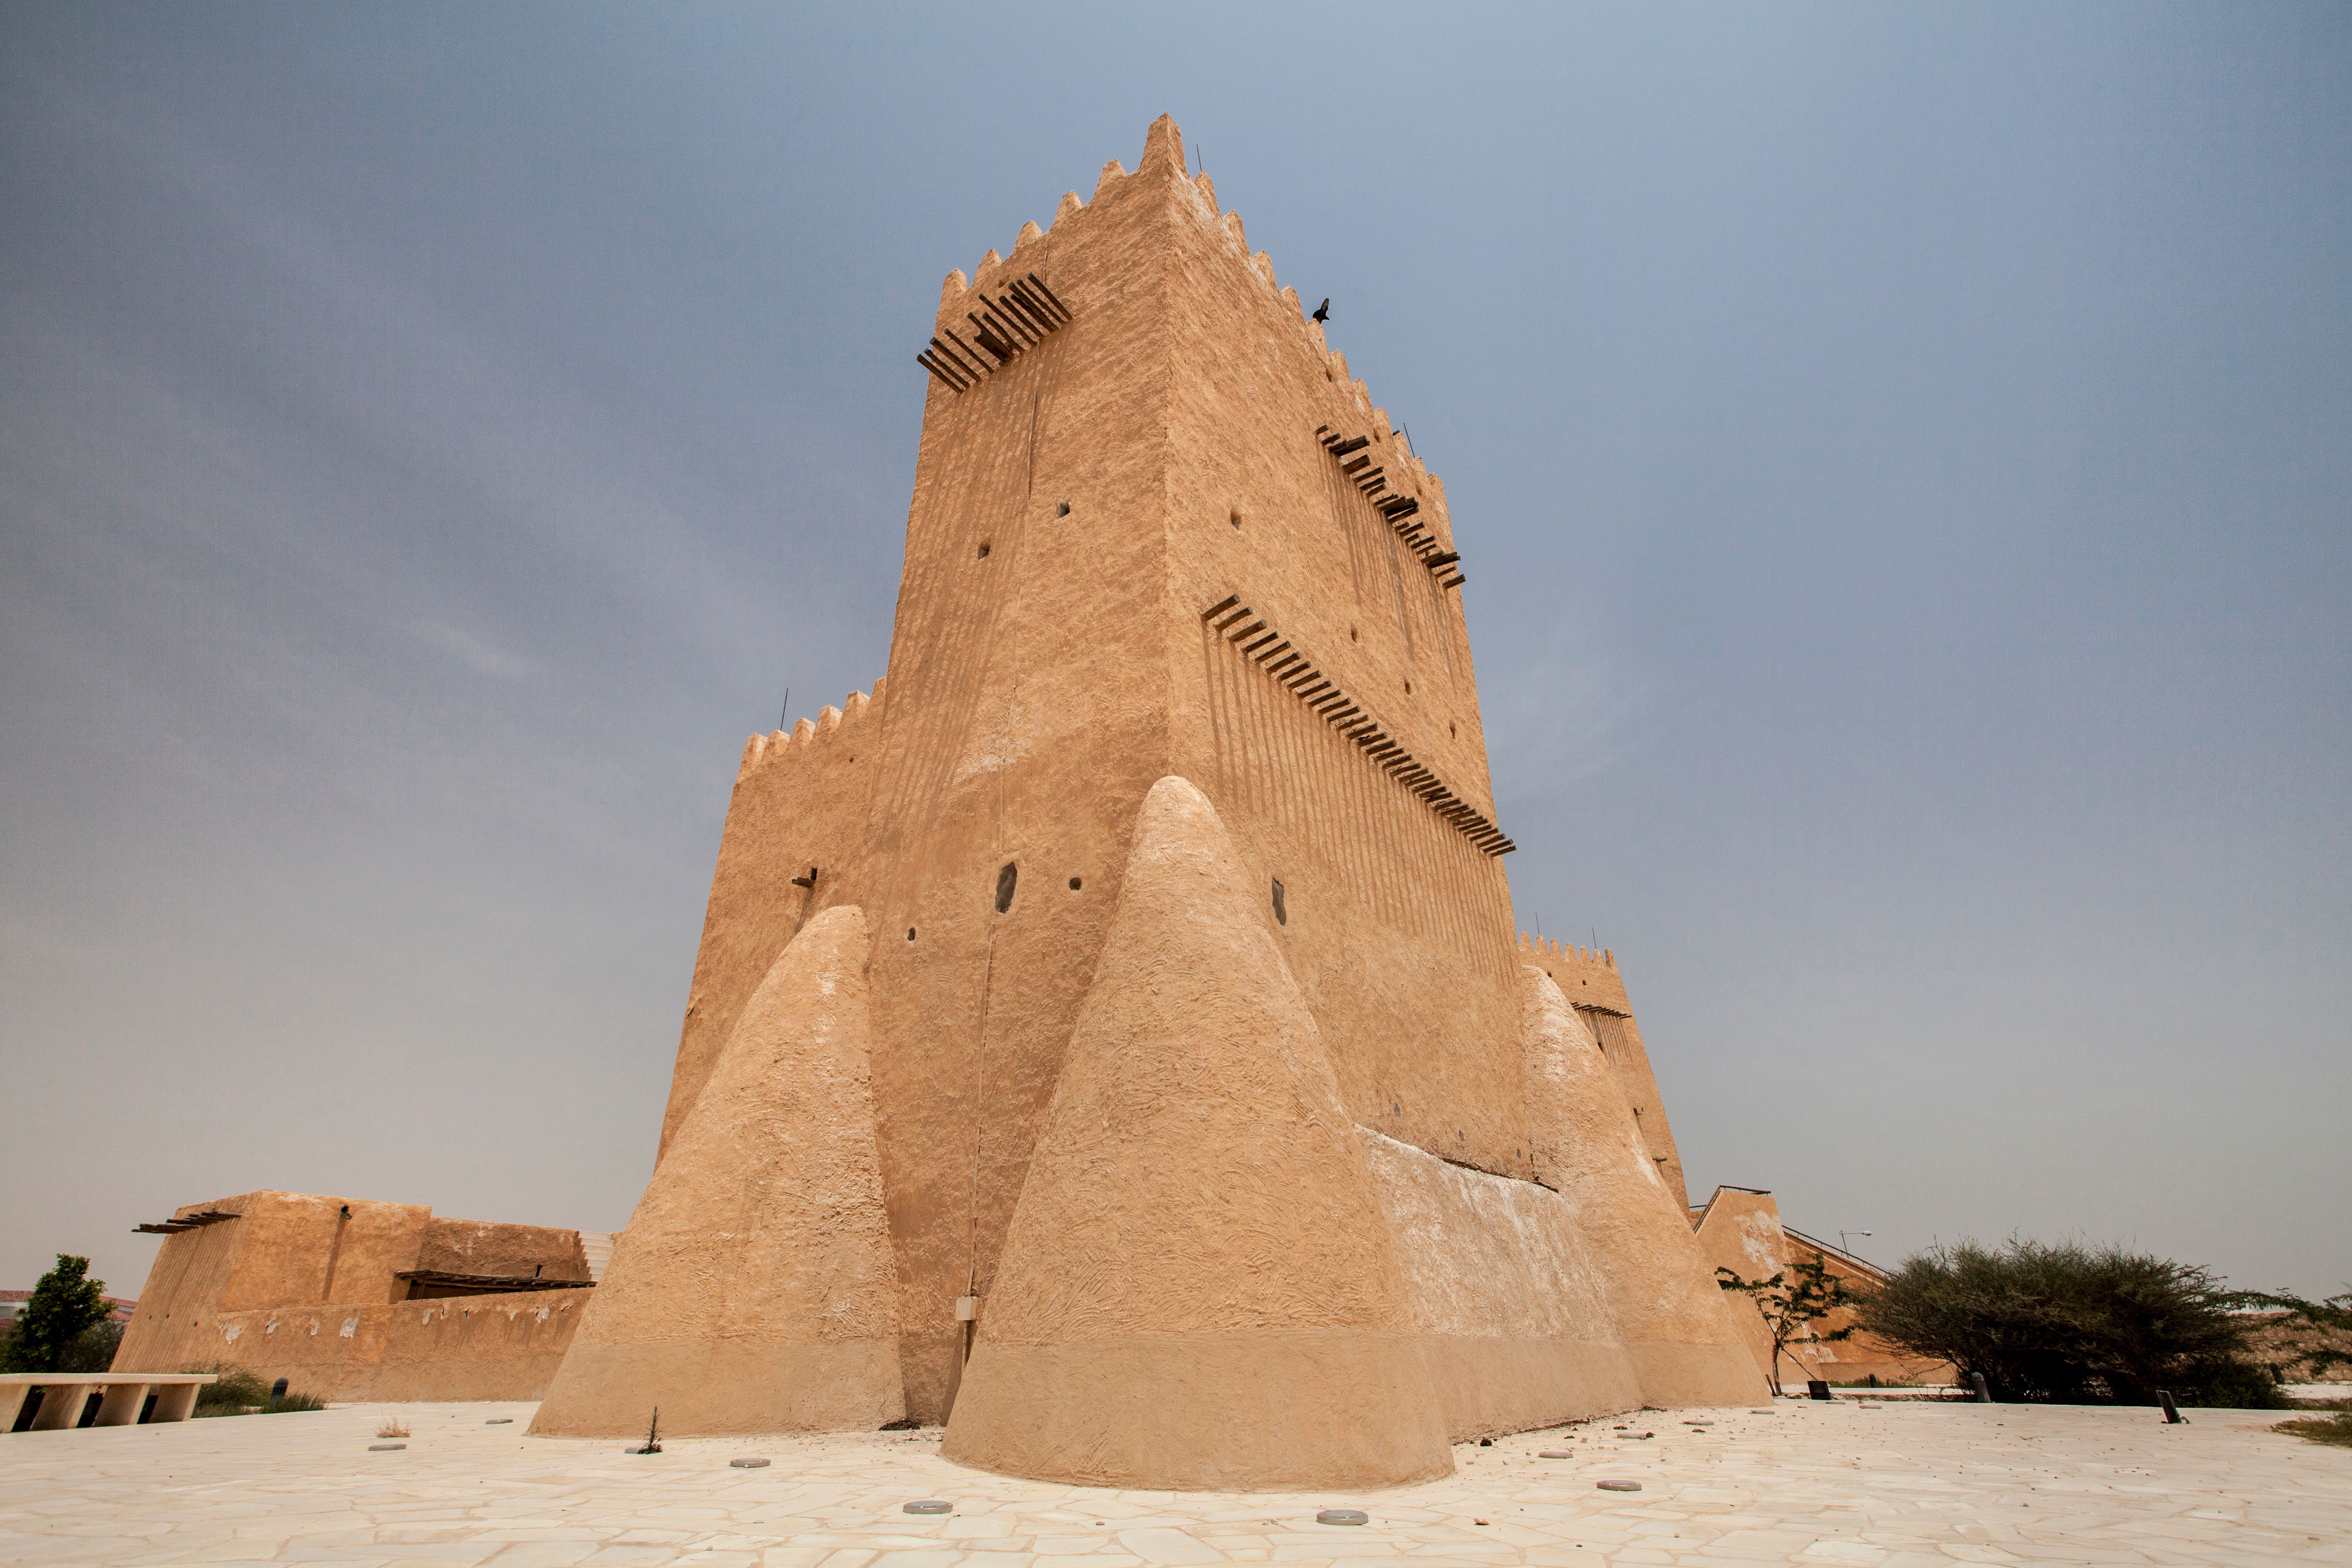 Barzan watchtower in a desert landscape against a blue sky taken during the Qatar Brazil Photography Expedition & Exhibition.